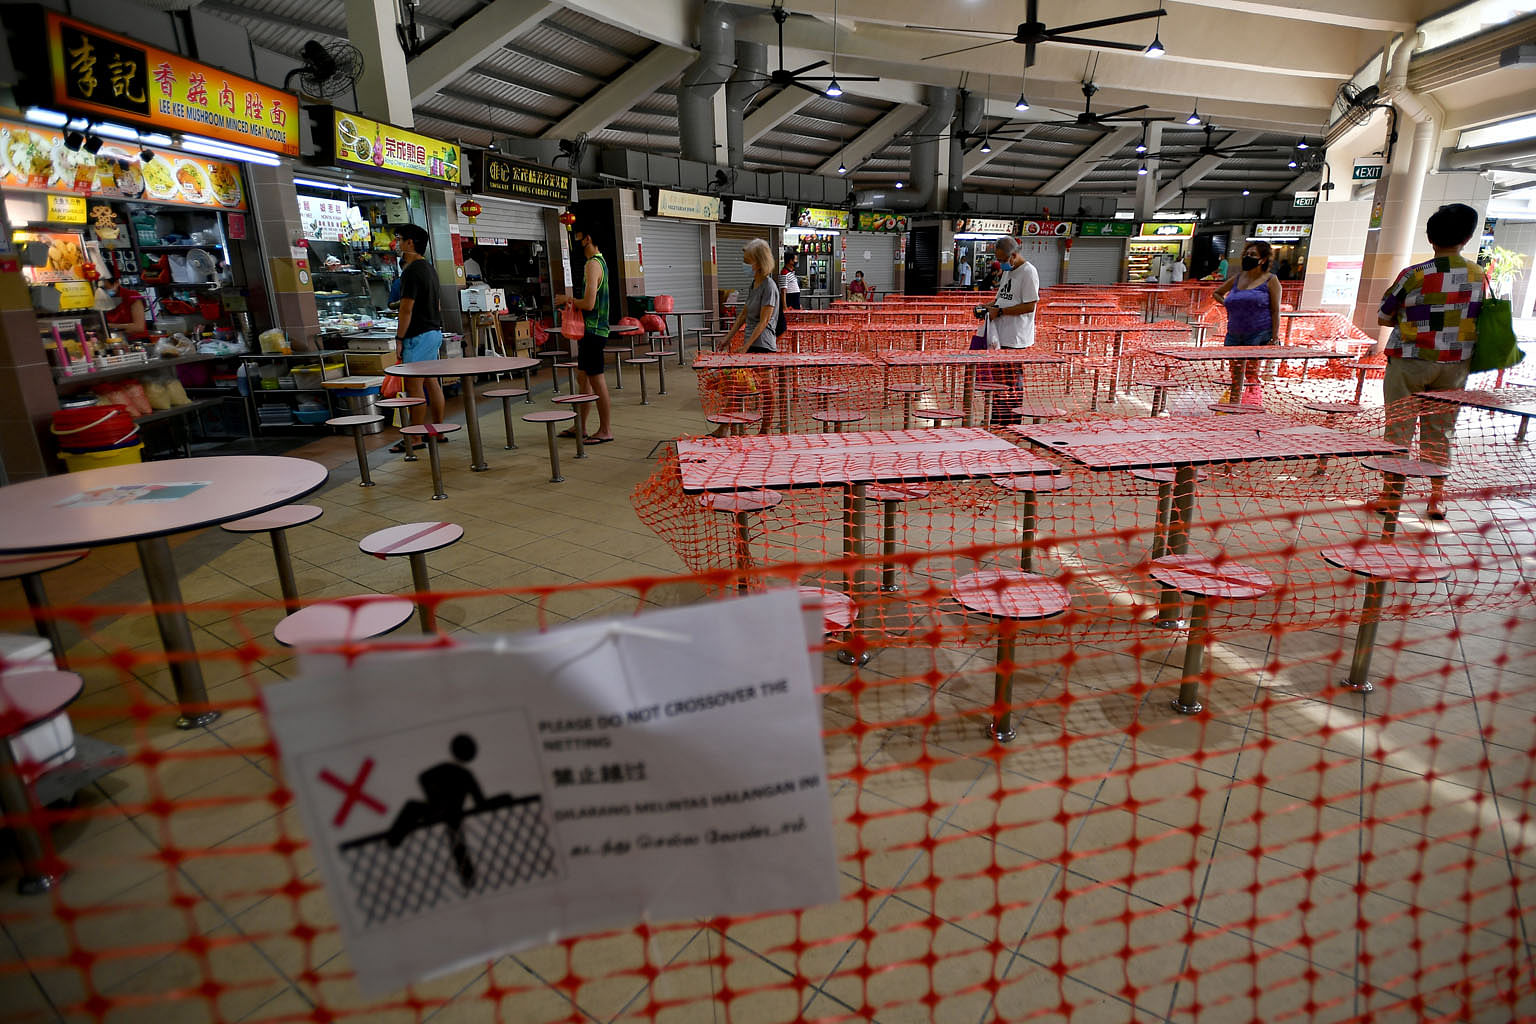 Patrons observing safe distancing while queueing for food at Tampines Round Market & Food Centre last Tuesday. This is part of the Government's precautionary measures for public health amid the coronavirus pandemic.